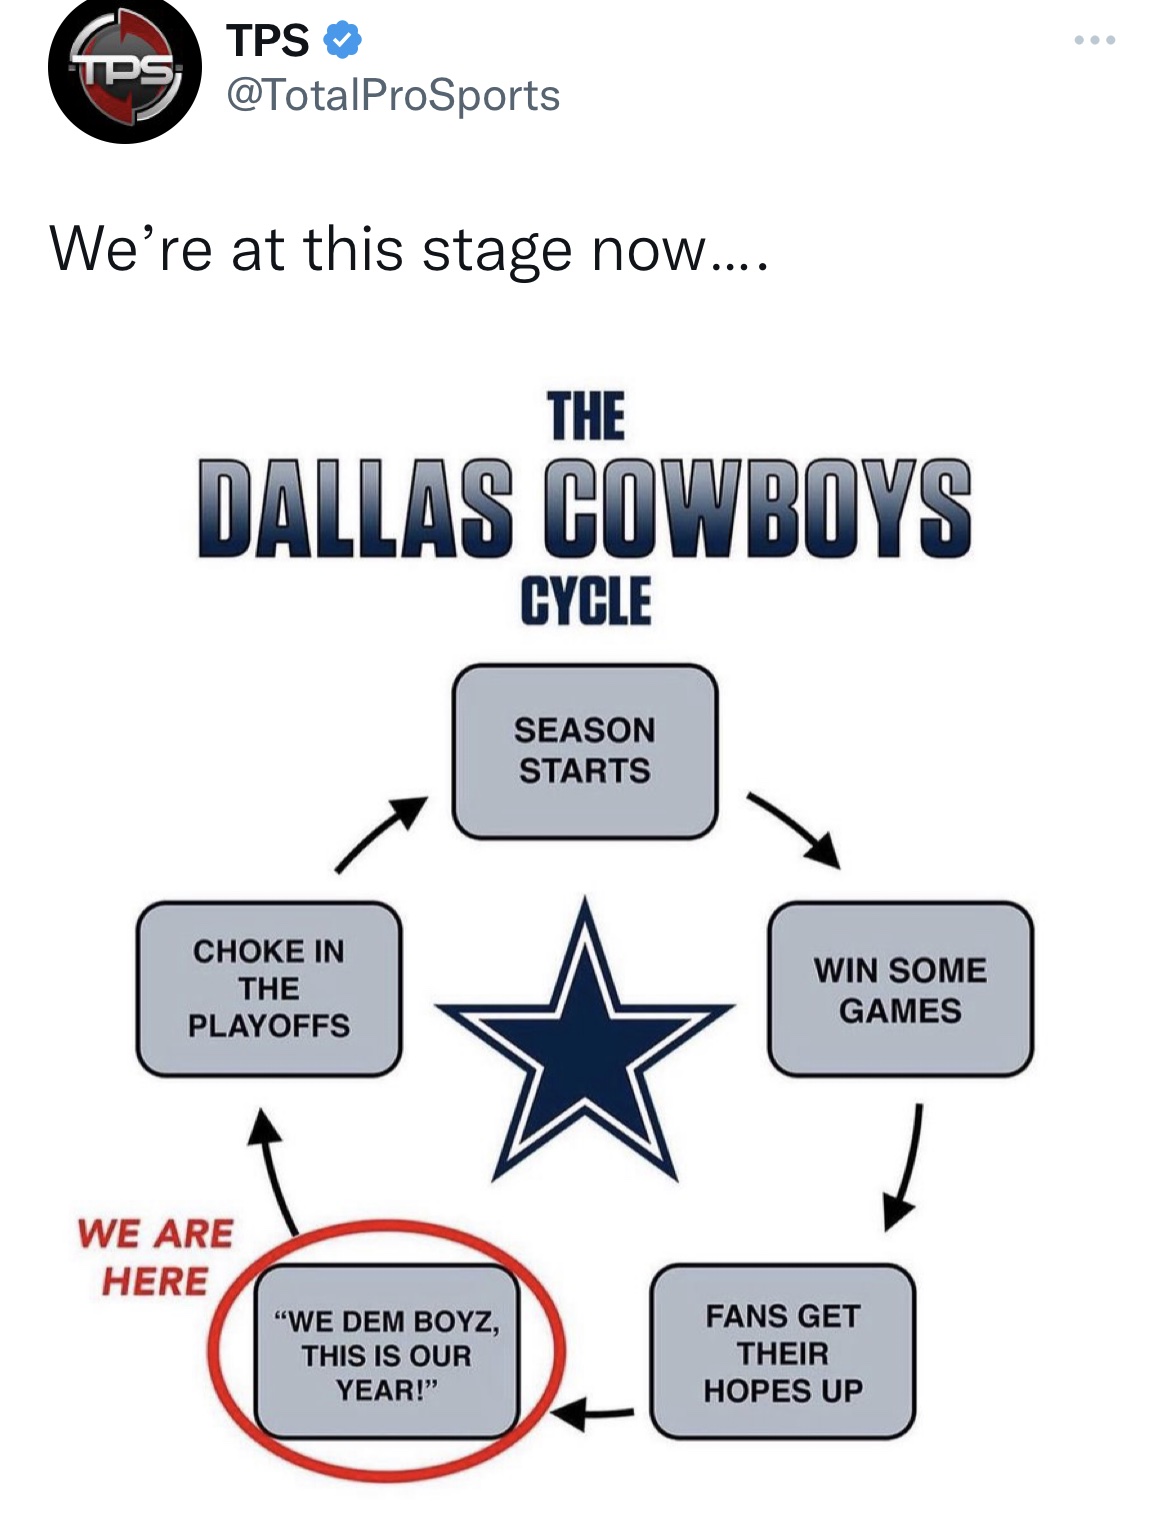 tweets roasting celebs - dallas cowboys cycle - Tps Tps We're at this stage now.... Dallas Cowboys Choke In The Playoffs We Are Here The "We Dem Boyz, This Is Our Year!" Cycle Season Starts Win Some Games Fans Get Their Hopes Up